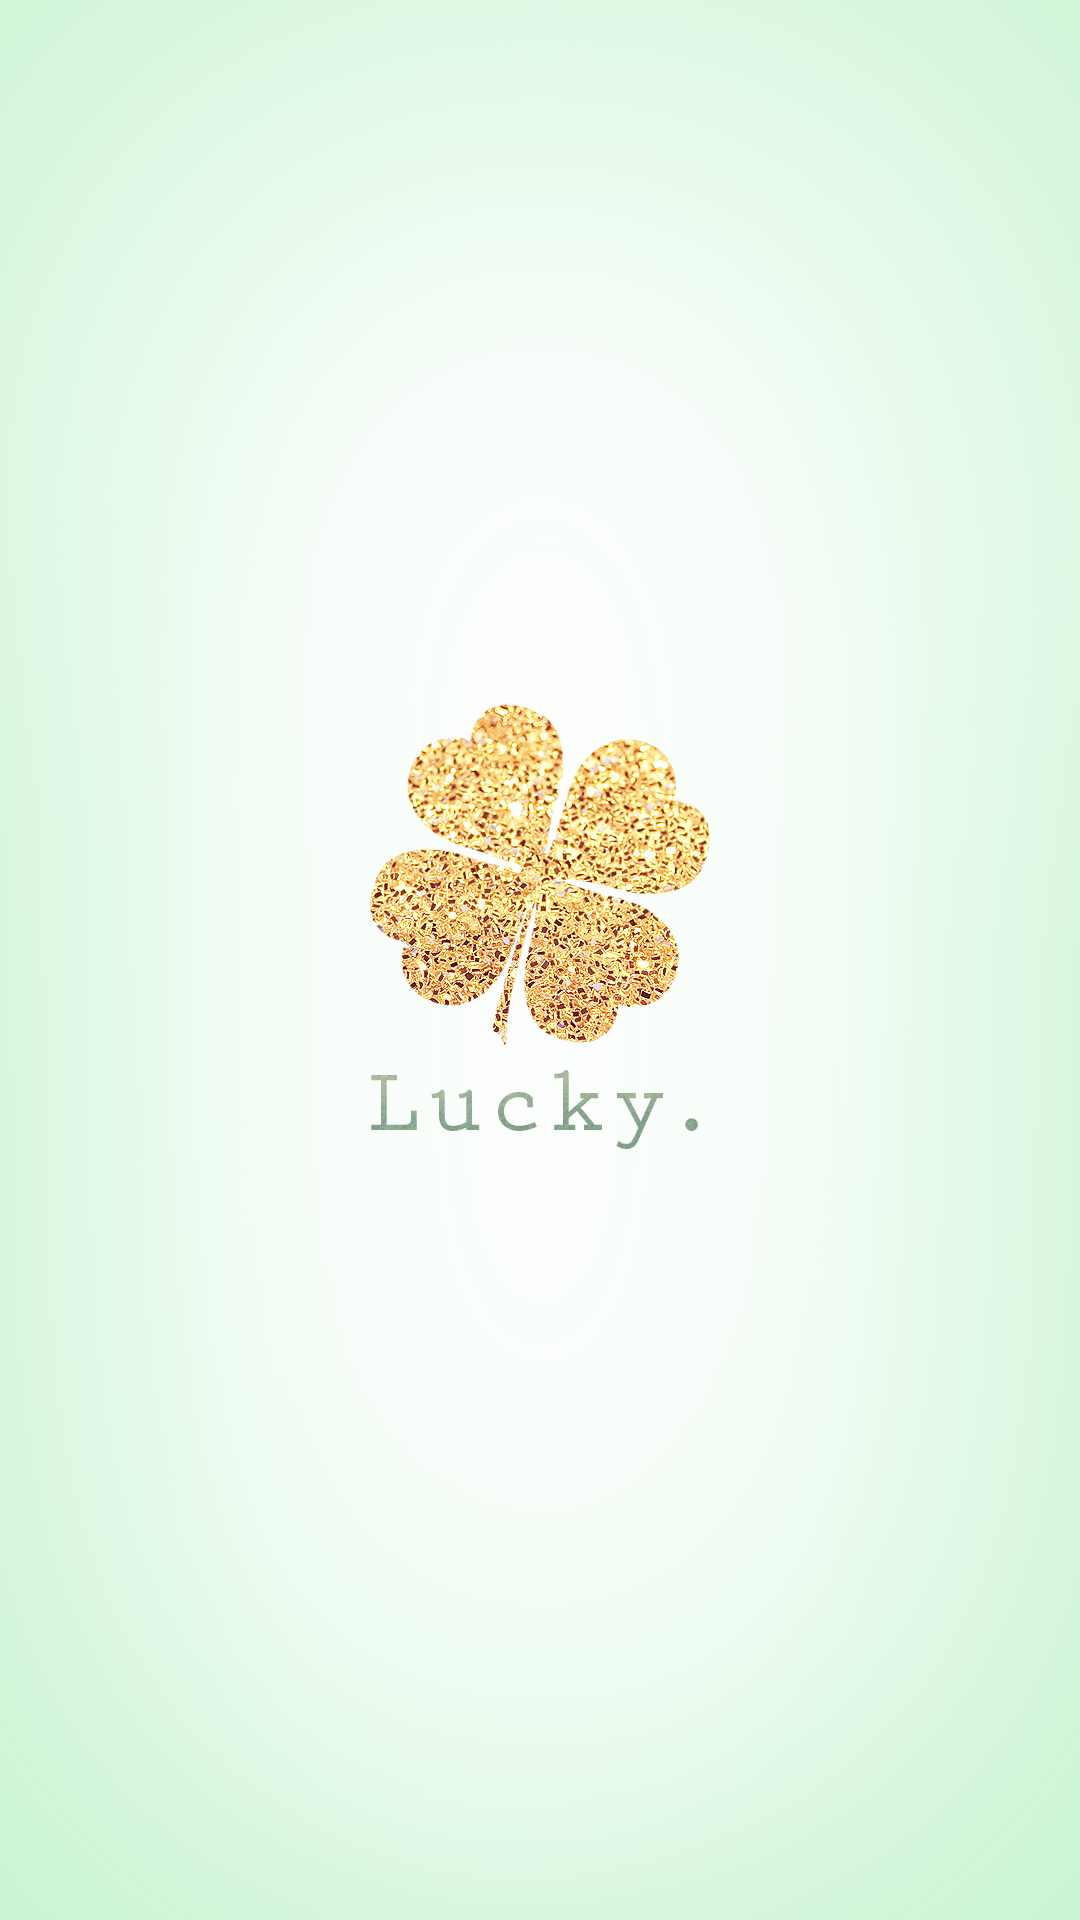 HD Phone Wallpaper Lucky Gold Glitter Four Leaf Clover By